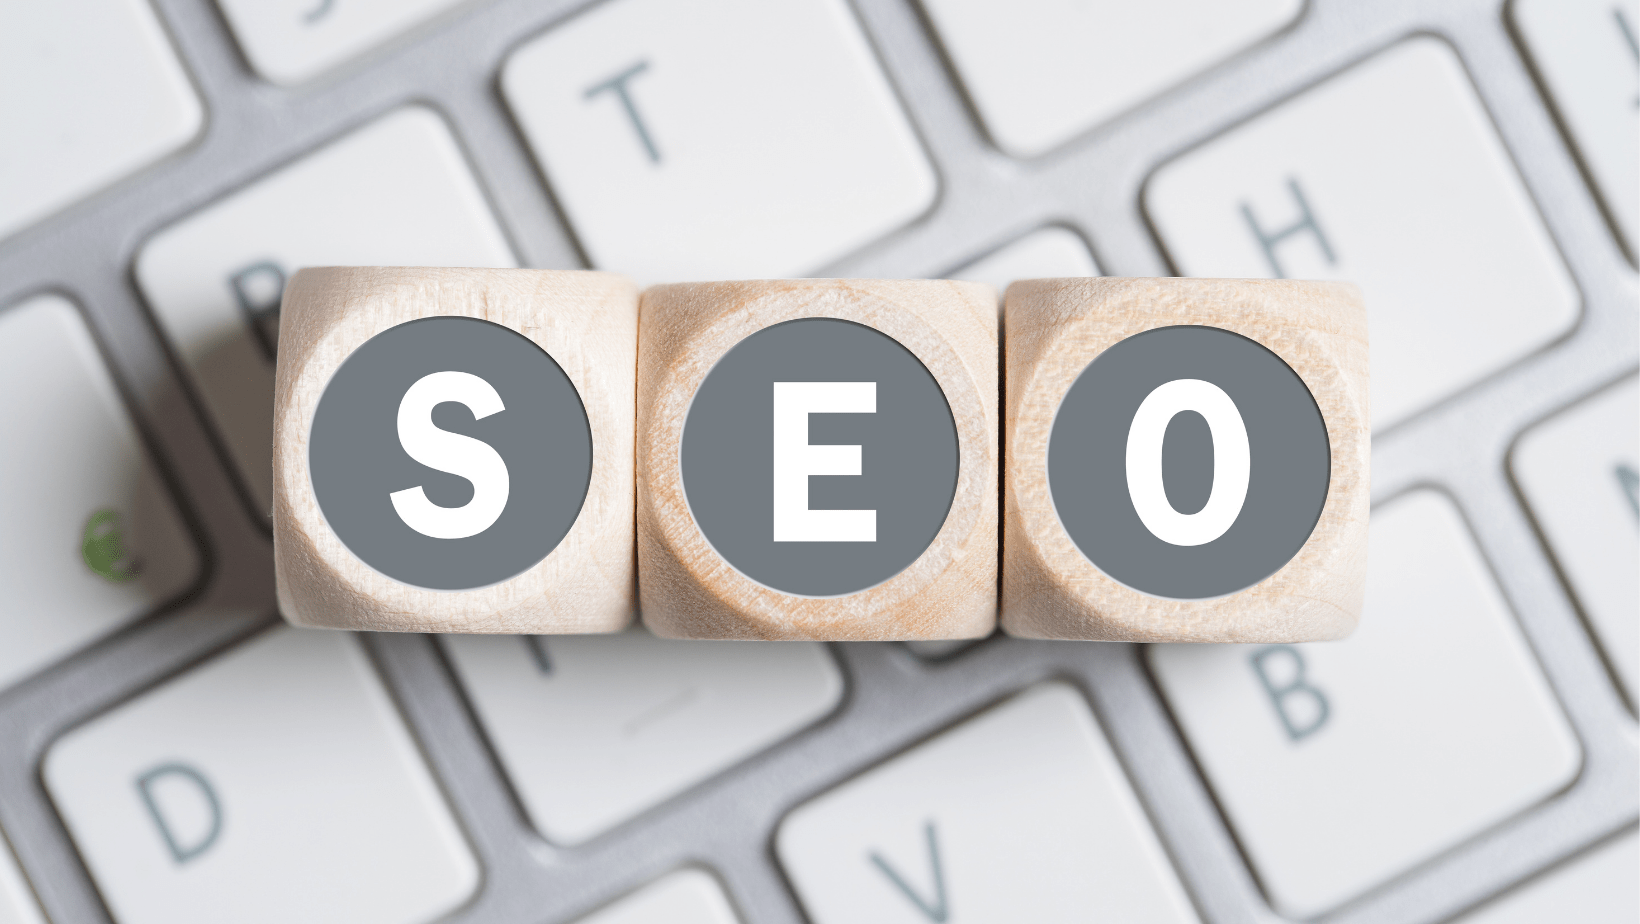 What are the various types of SEO?